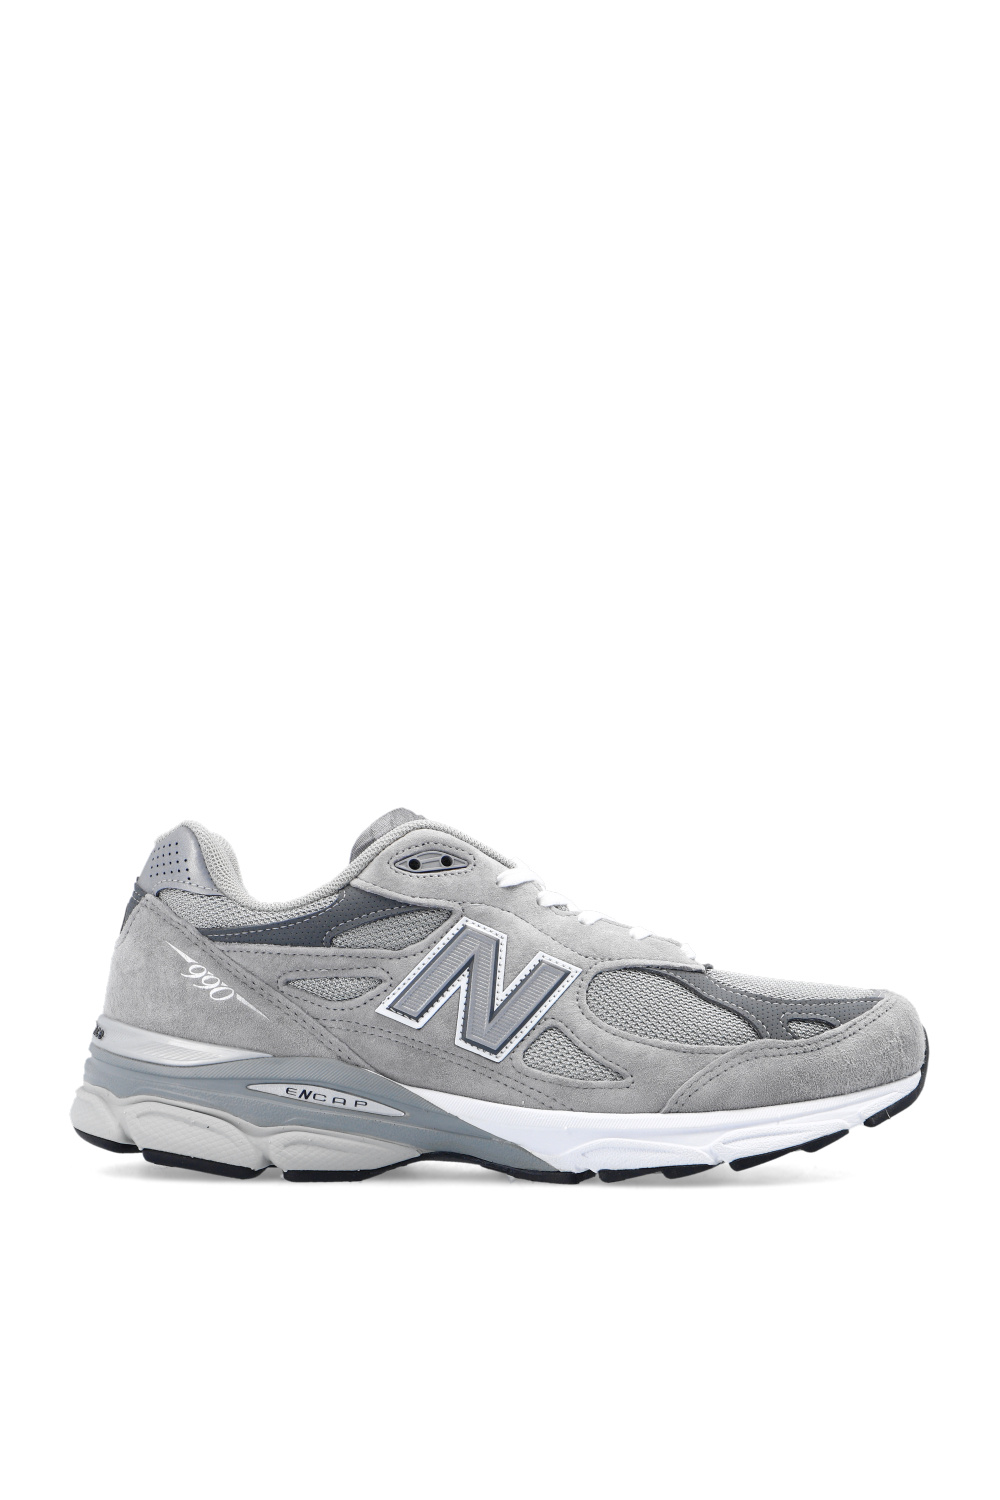 New Balance '990' sneakers | IetpShops | Men's Shoes | KITH RONNIE